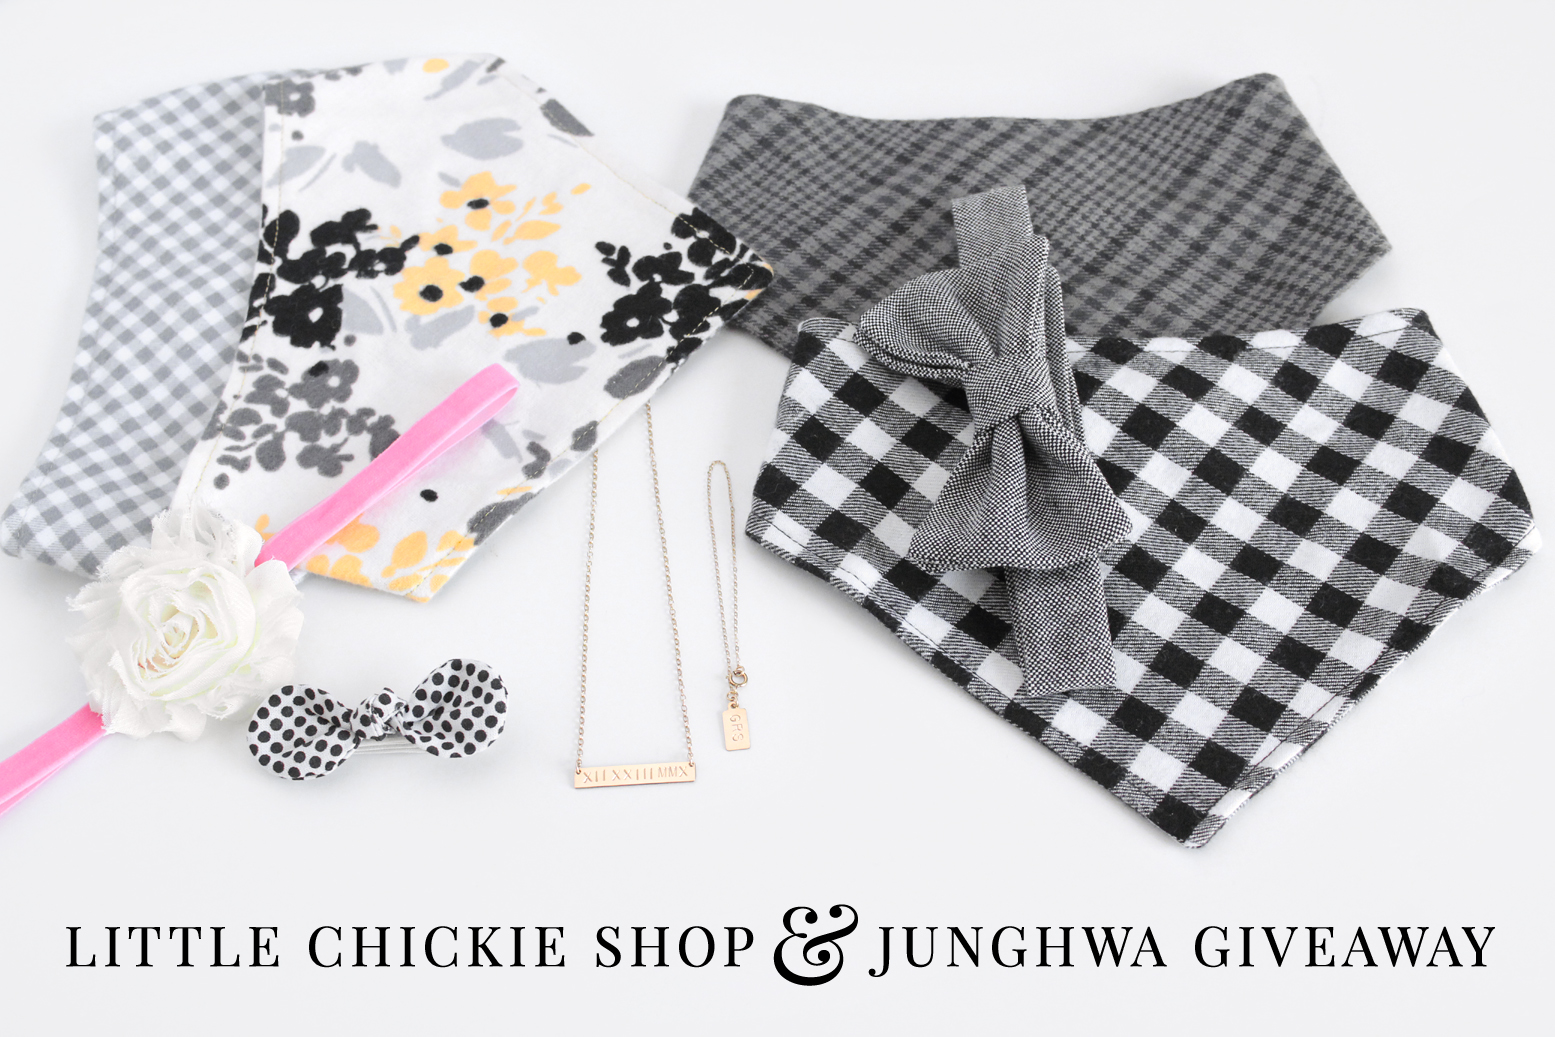 Little Chickie Shop & Junghwa